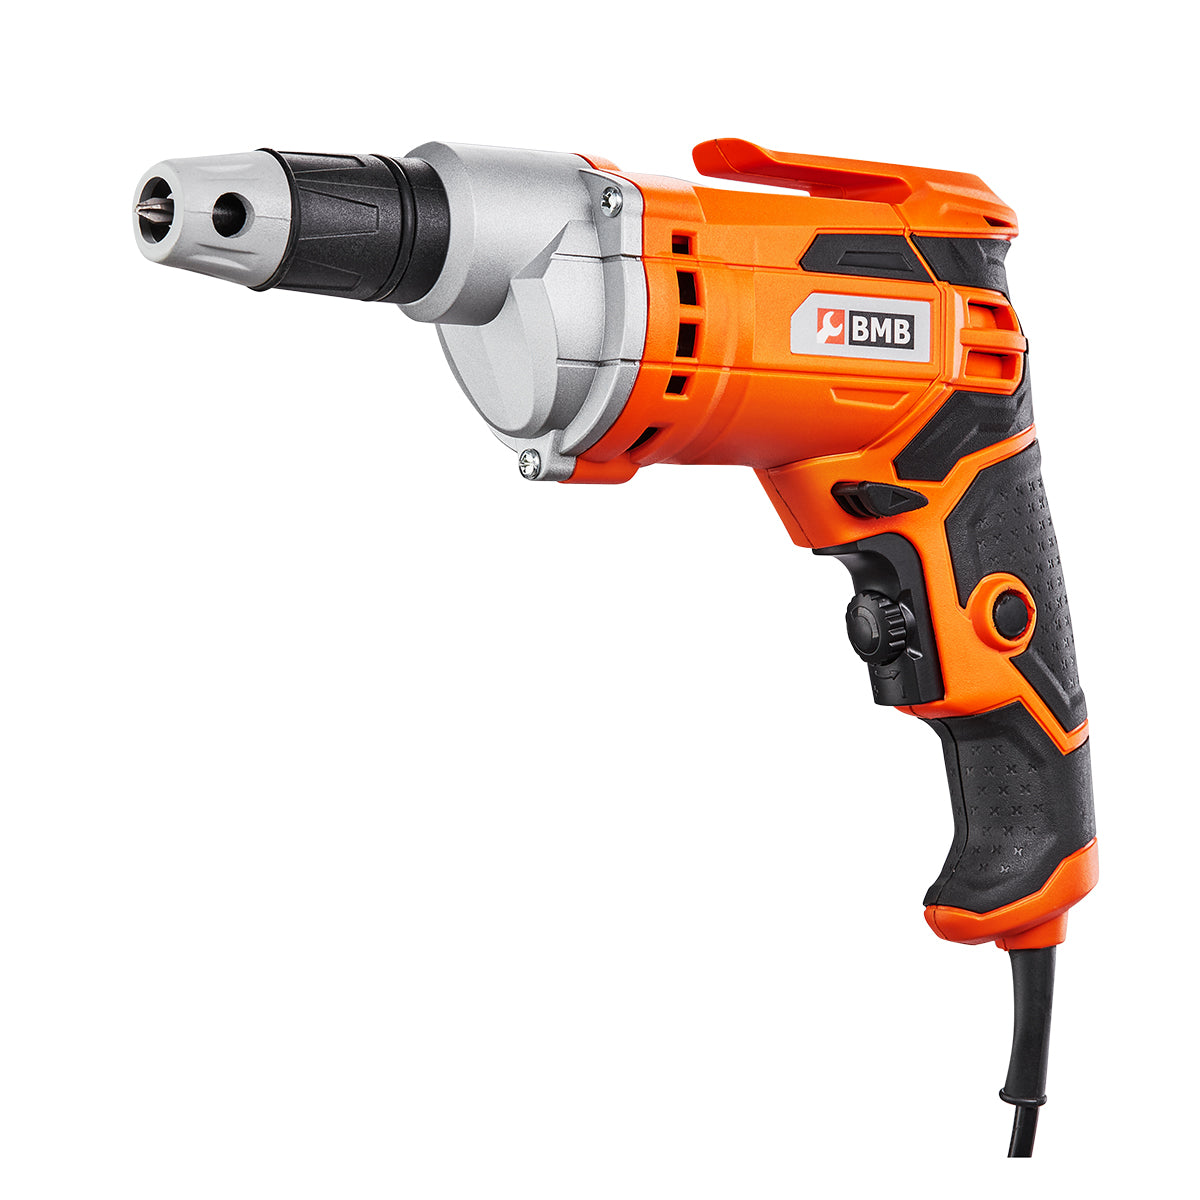 Elecrtic Drywall Screwdriver with Speed Controller - 520W